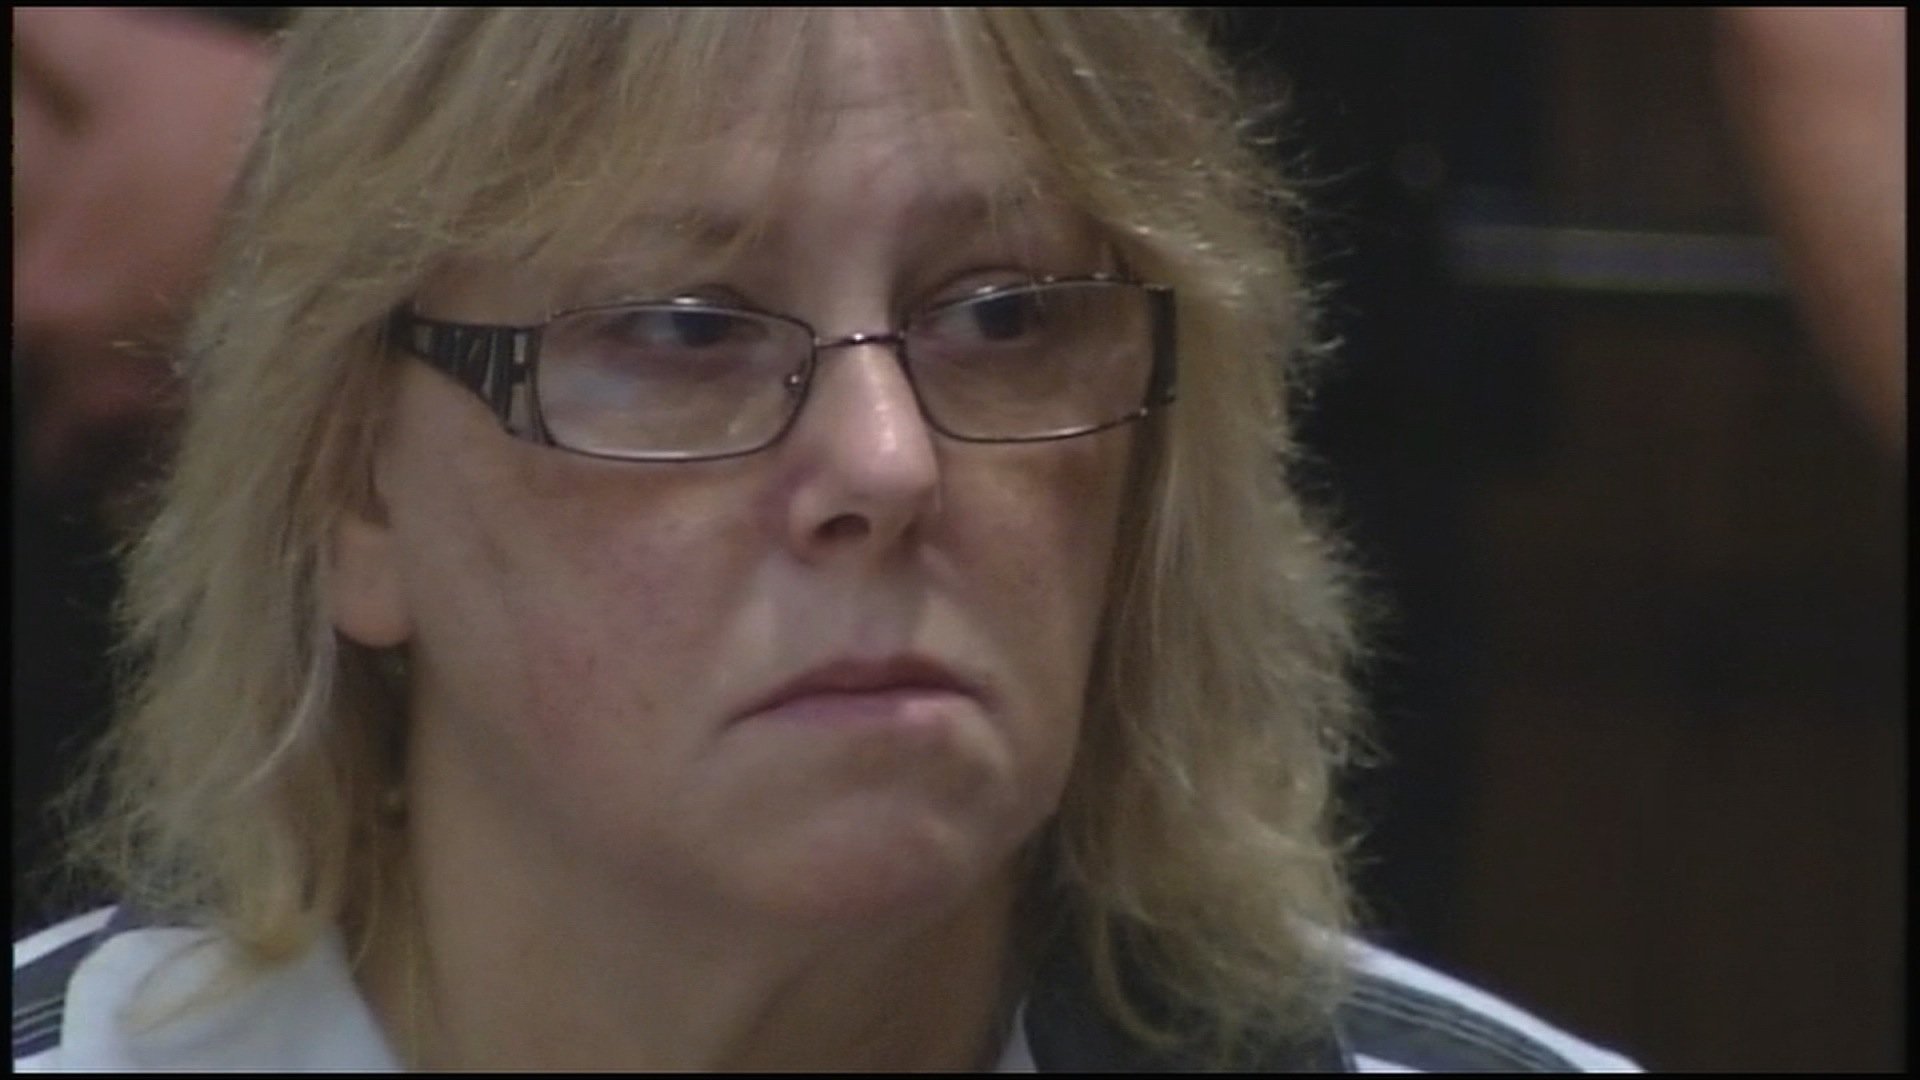 Joyce Mitchell, 51, the woman accused of helping David Sweat and Richard Matt escape from Clinton Correctional Facility in New York on June 5, 2015, pleaded guilty to two charges in the case on July 28.